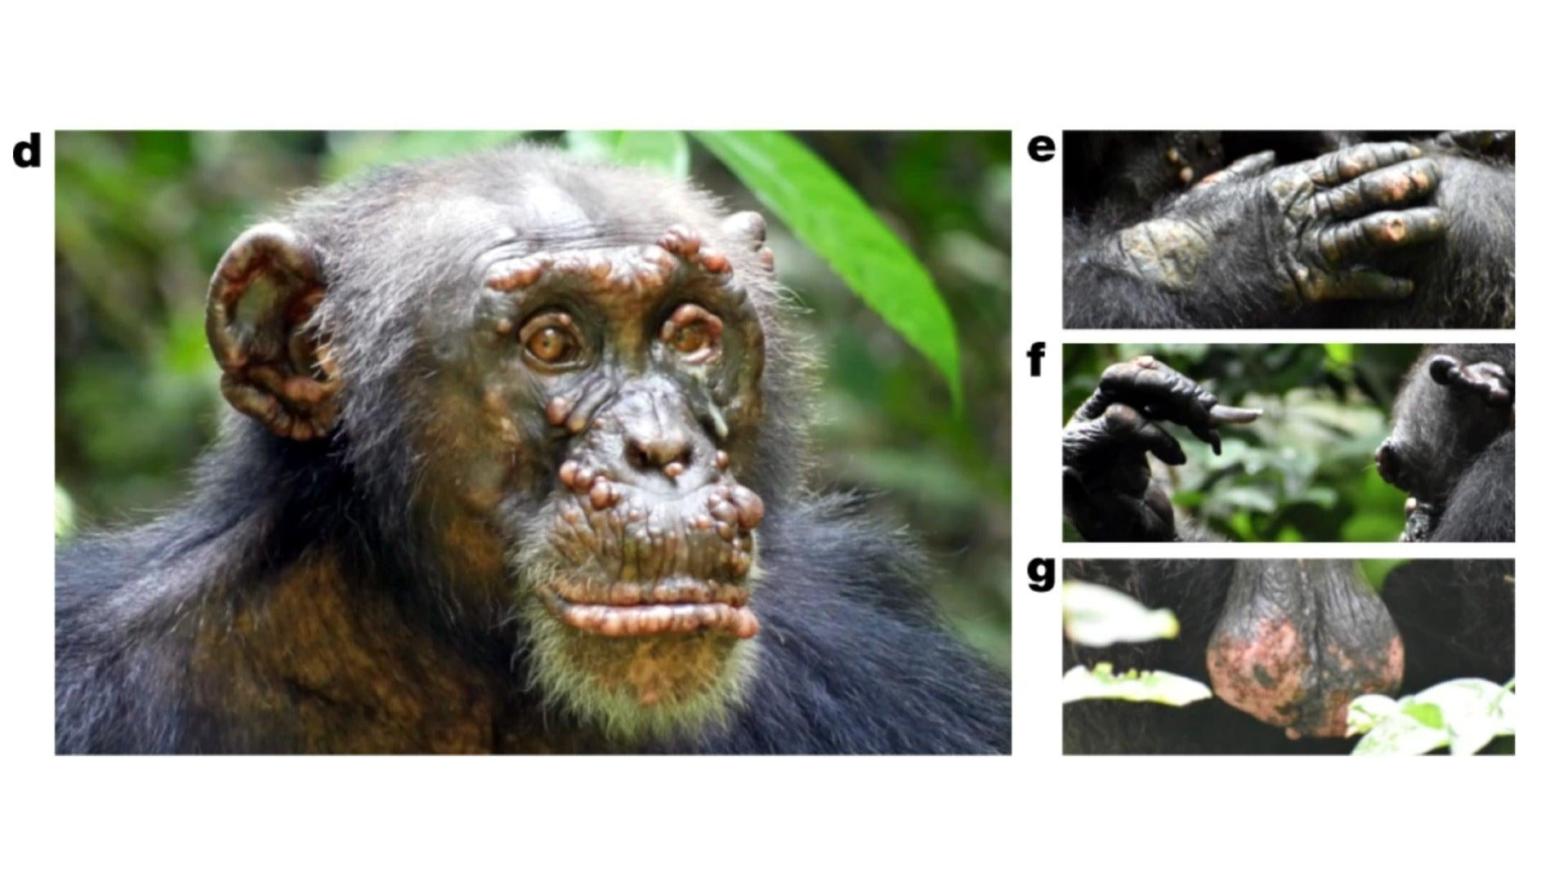 Clinical signs of leprosy in an adult male chimpanzee named Woodstock can be seen along his face, hands, and scrotum.  (Image: Hockings, et al/Nature)